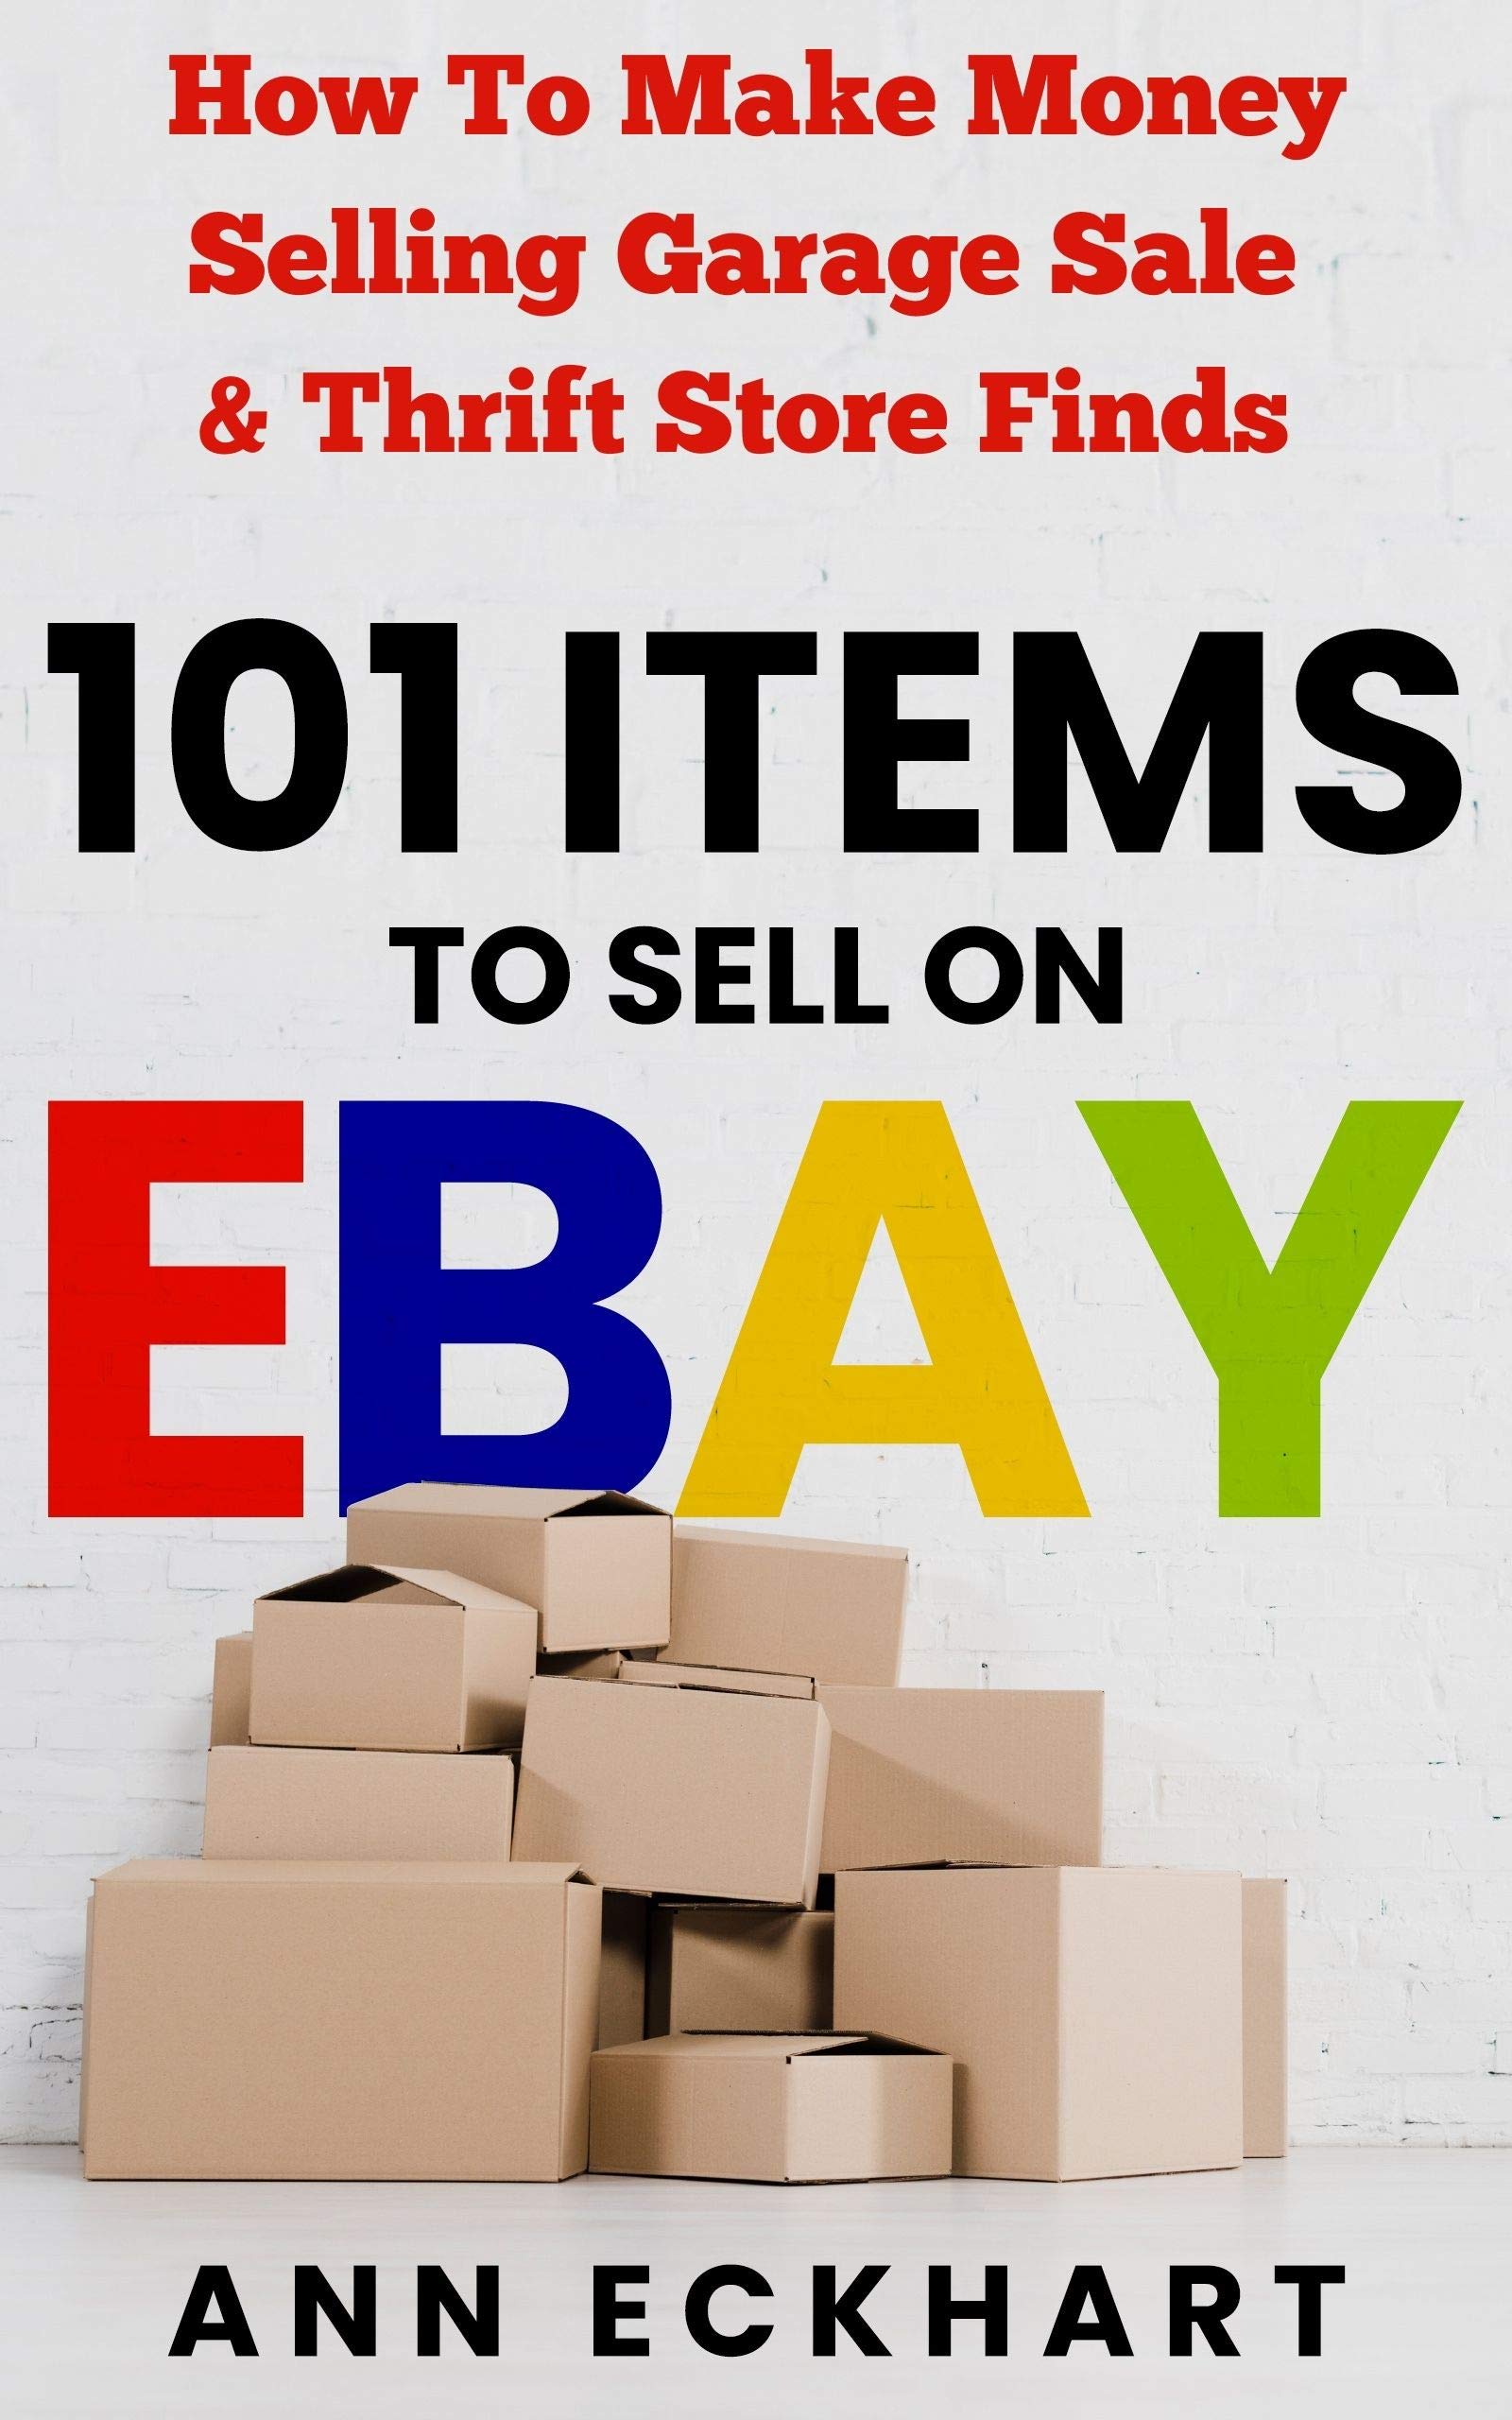 101 Items To Sell On Ebay: How to Make Money Selling Garage Sale & Thrift Store Finds (8th Edition) (Home Based Business Guide Books Book 10)